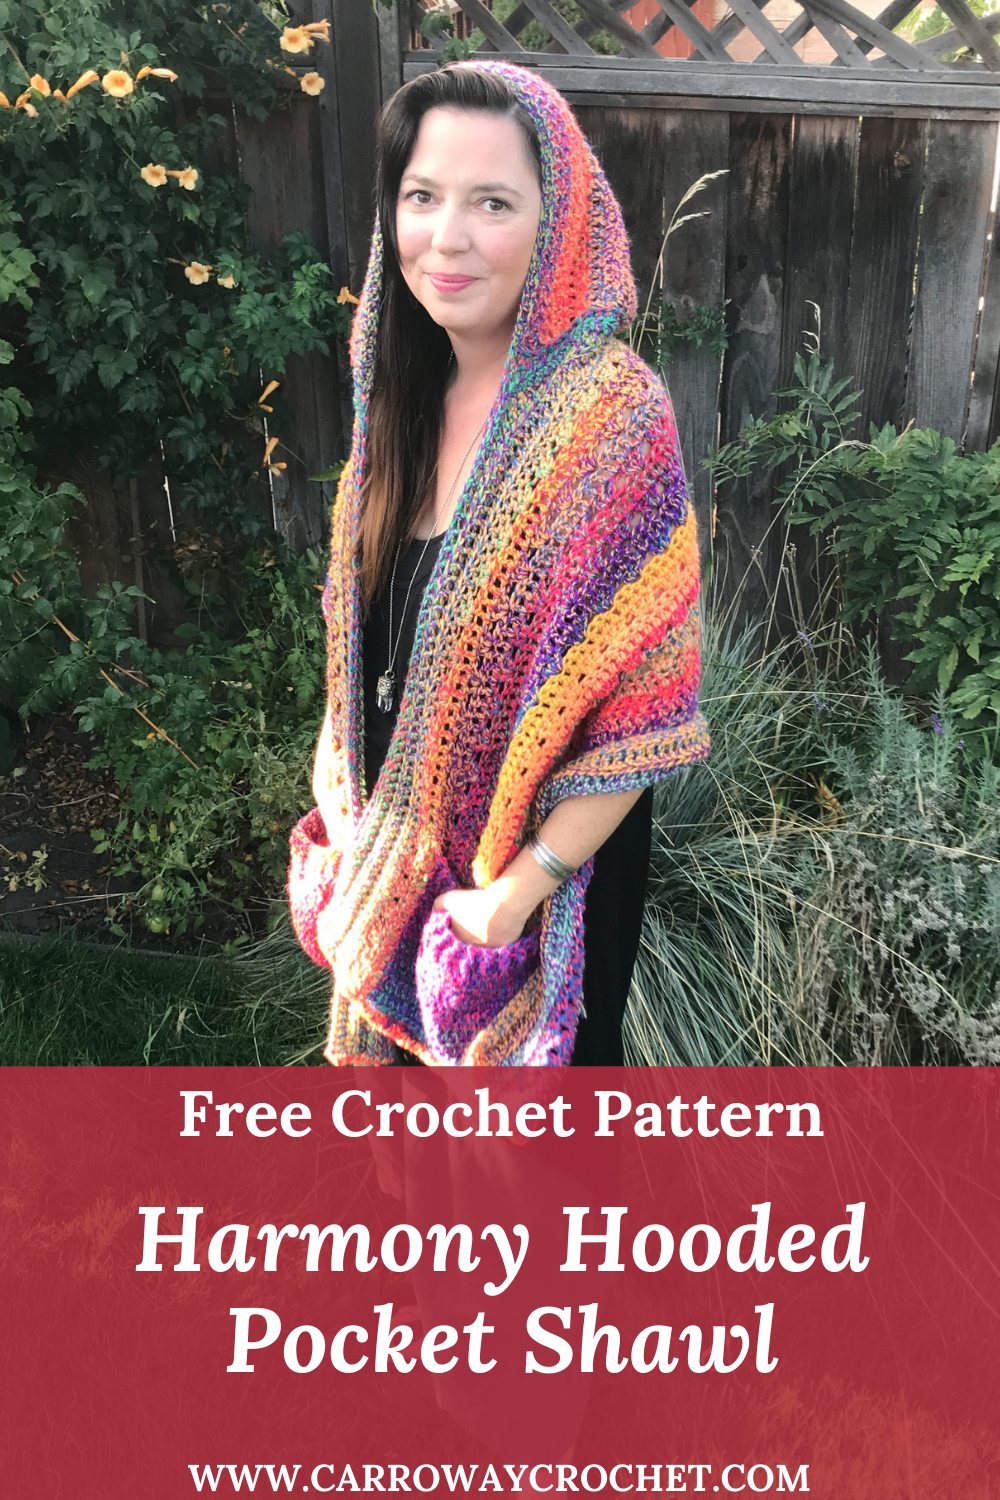 9 Hooded Shawl Free Crochet Pattern and Paid - Page 2 of 2  Crochet hooded  scarf pattern, Crochet shawl pattern free, Crochet poncho free pattern